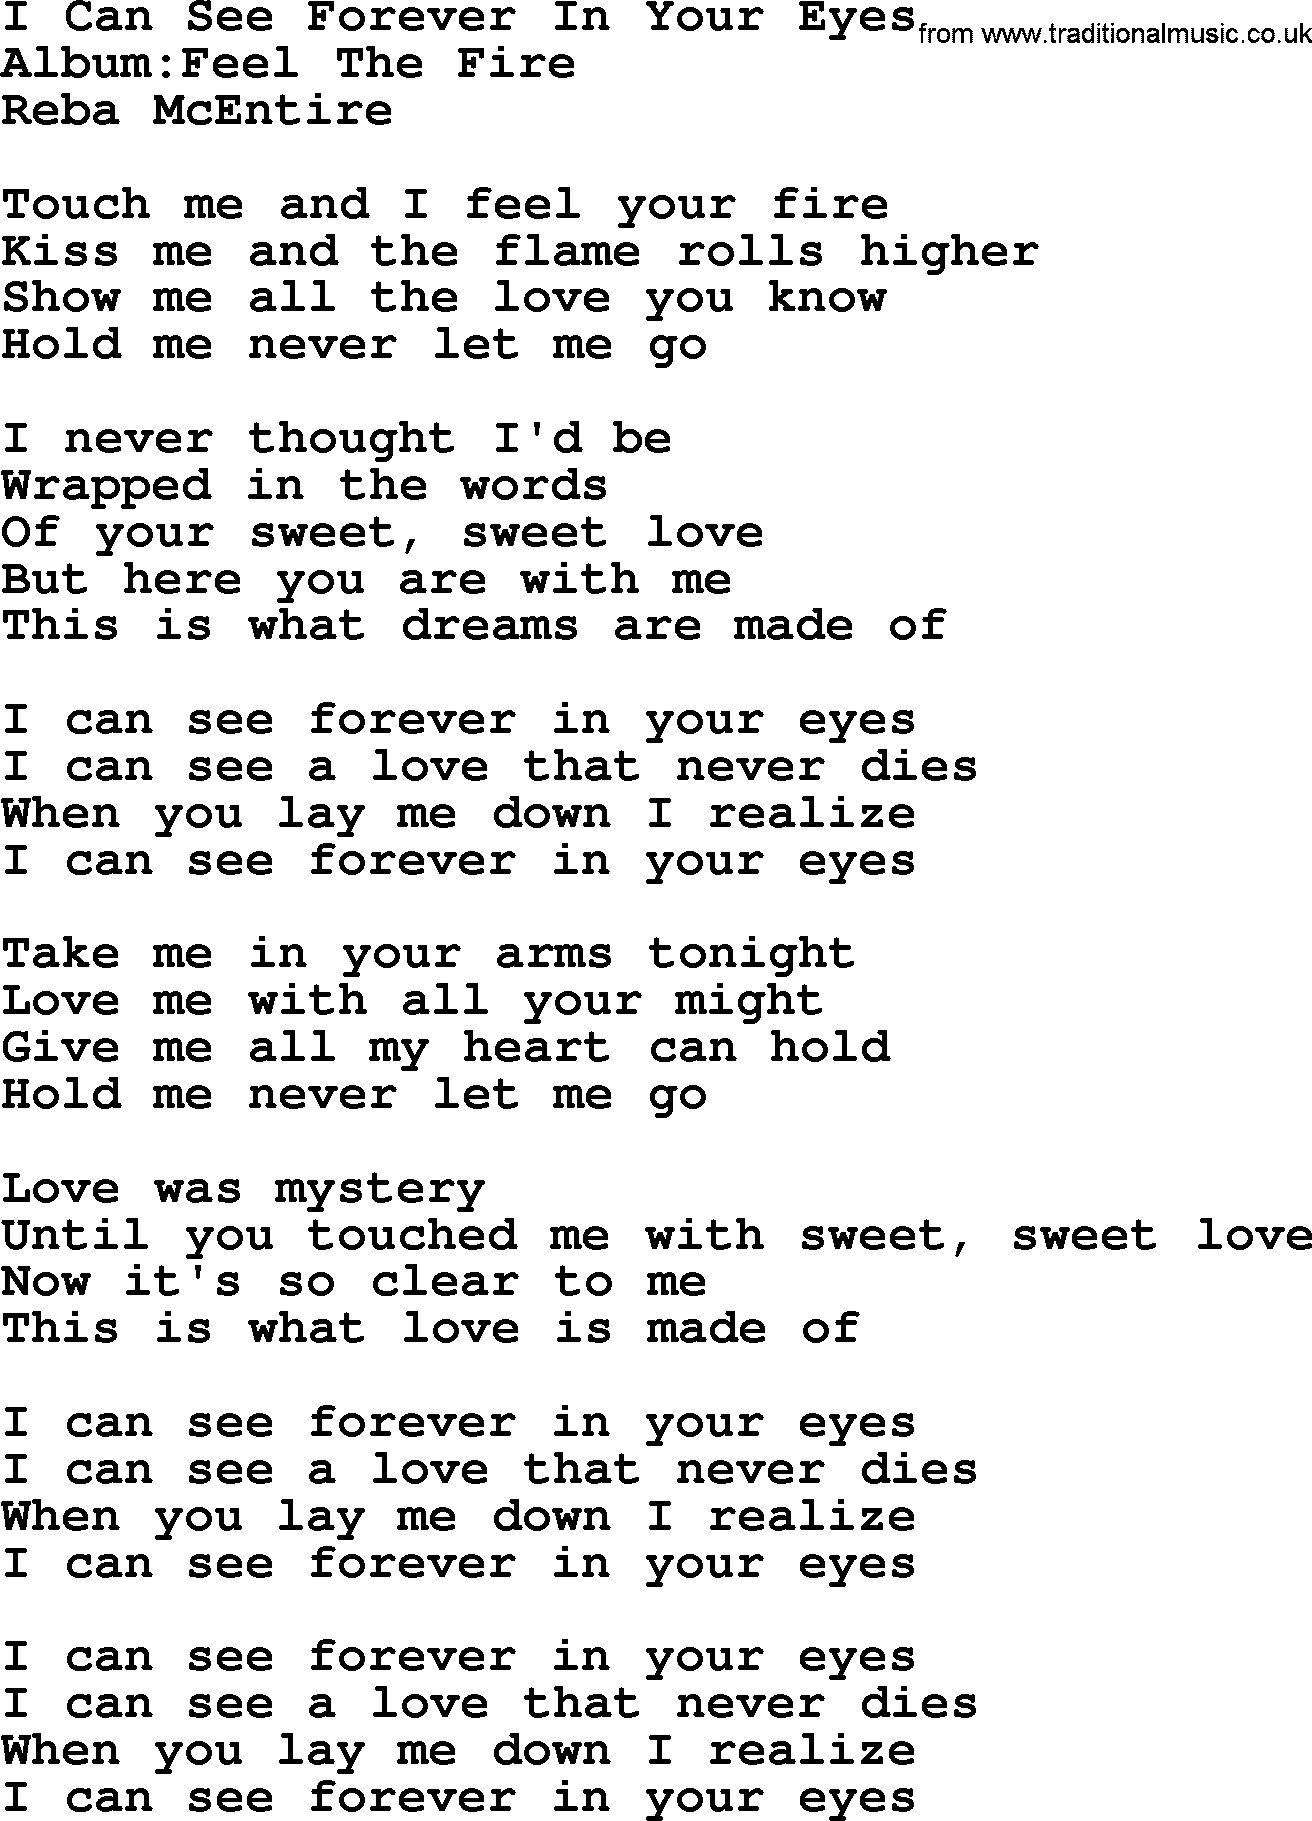 Reba McEntire song: I Can See Forever In Your Eyes lyrics